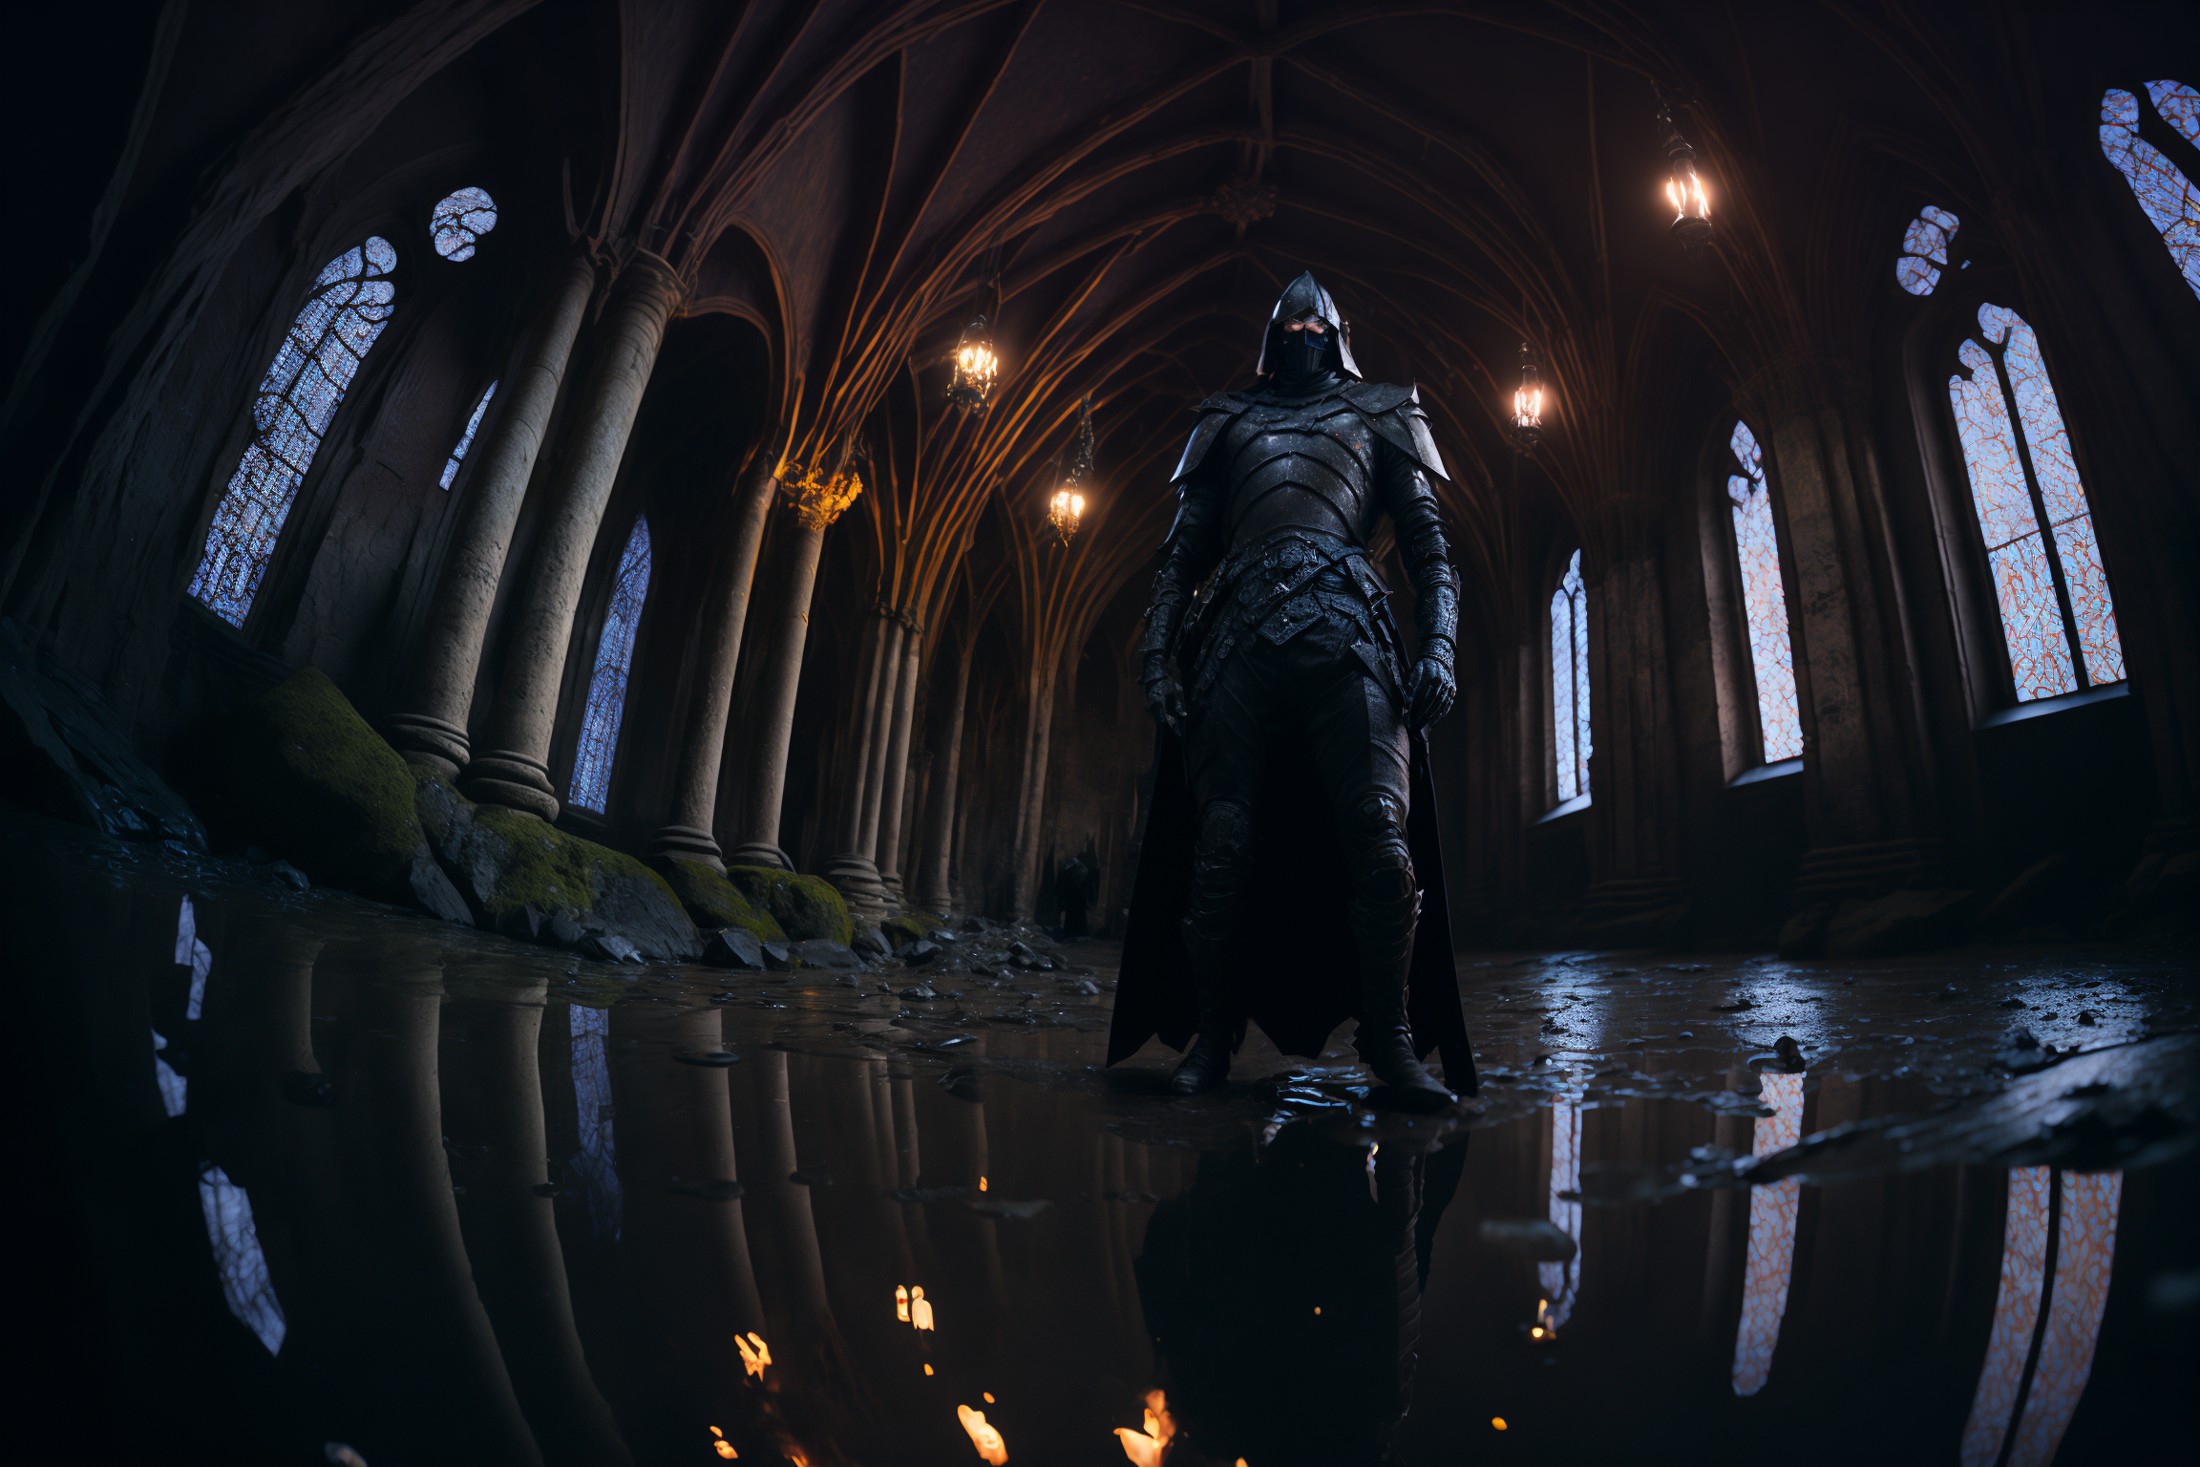 fisheye lens, portrait photo of medieval knight standing inside a gothic church, wet stone, puddles, infinite vaults, bloo...